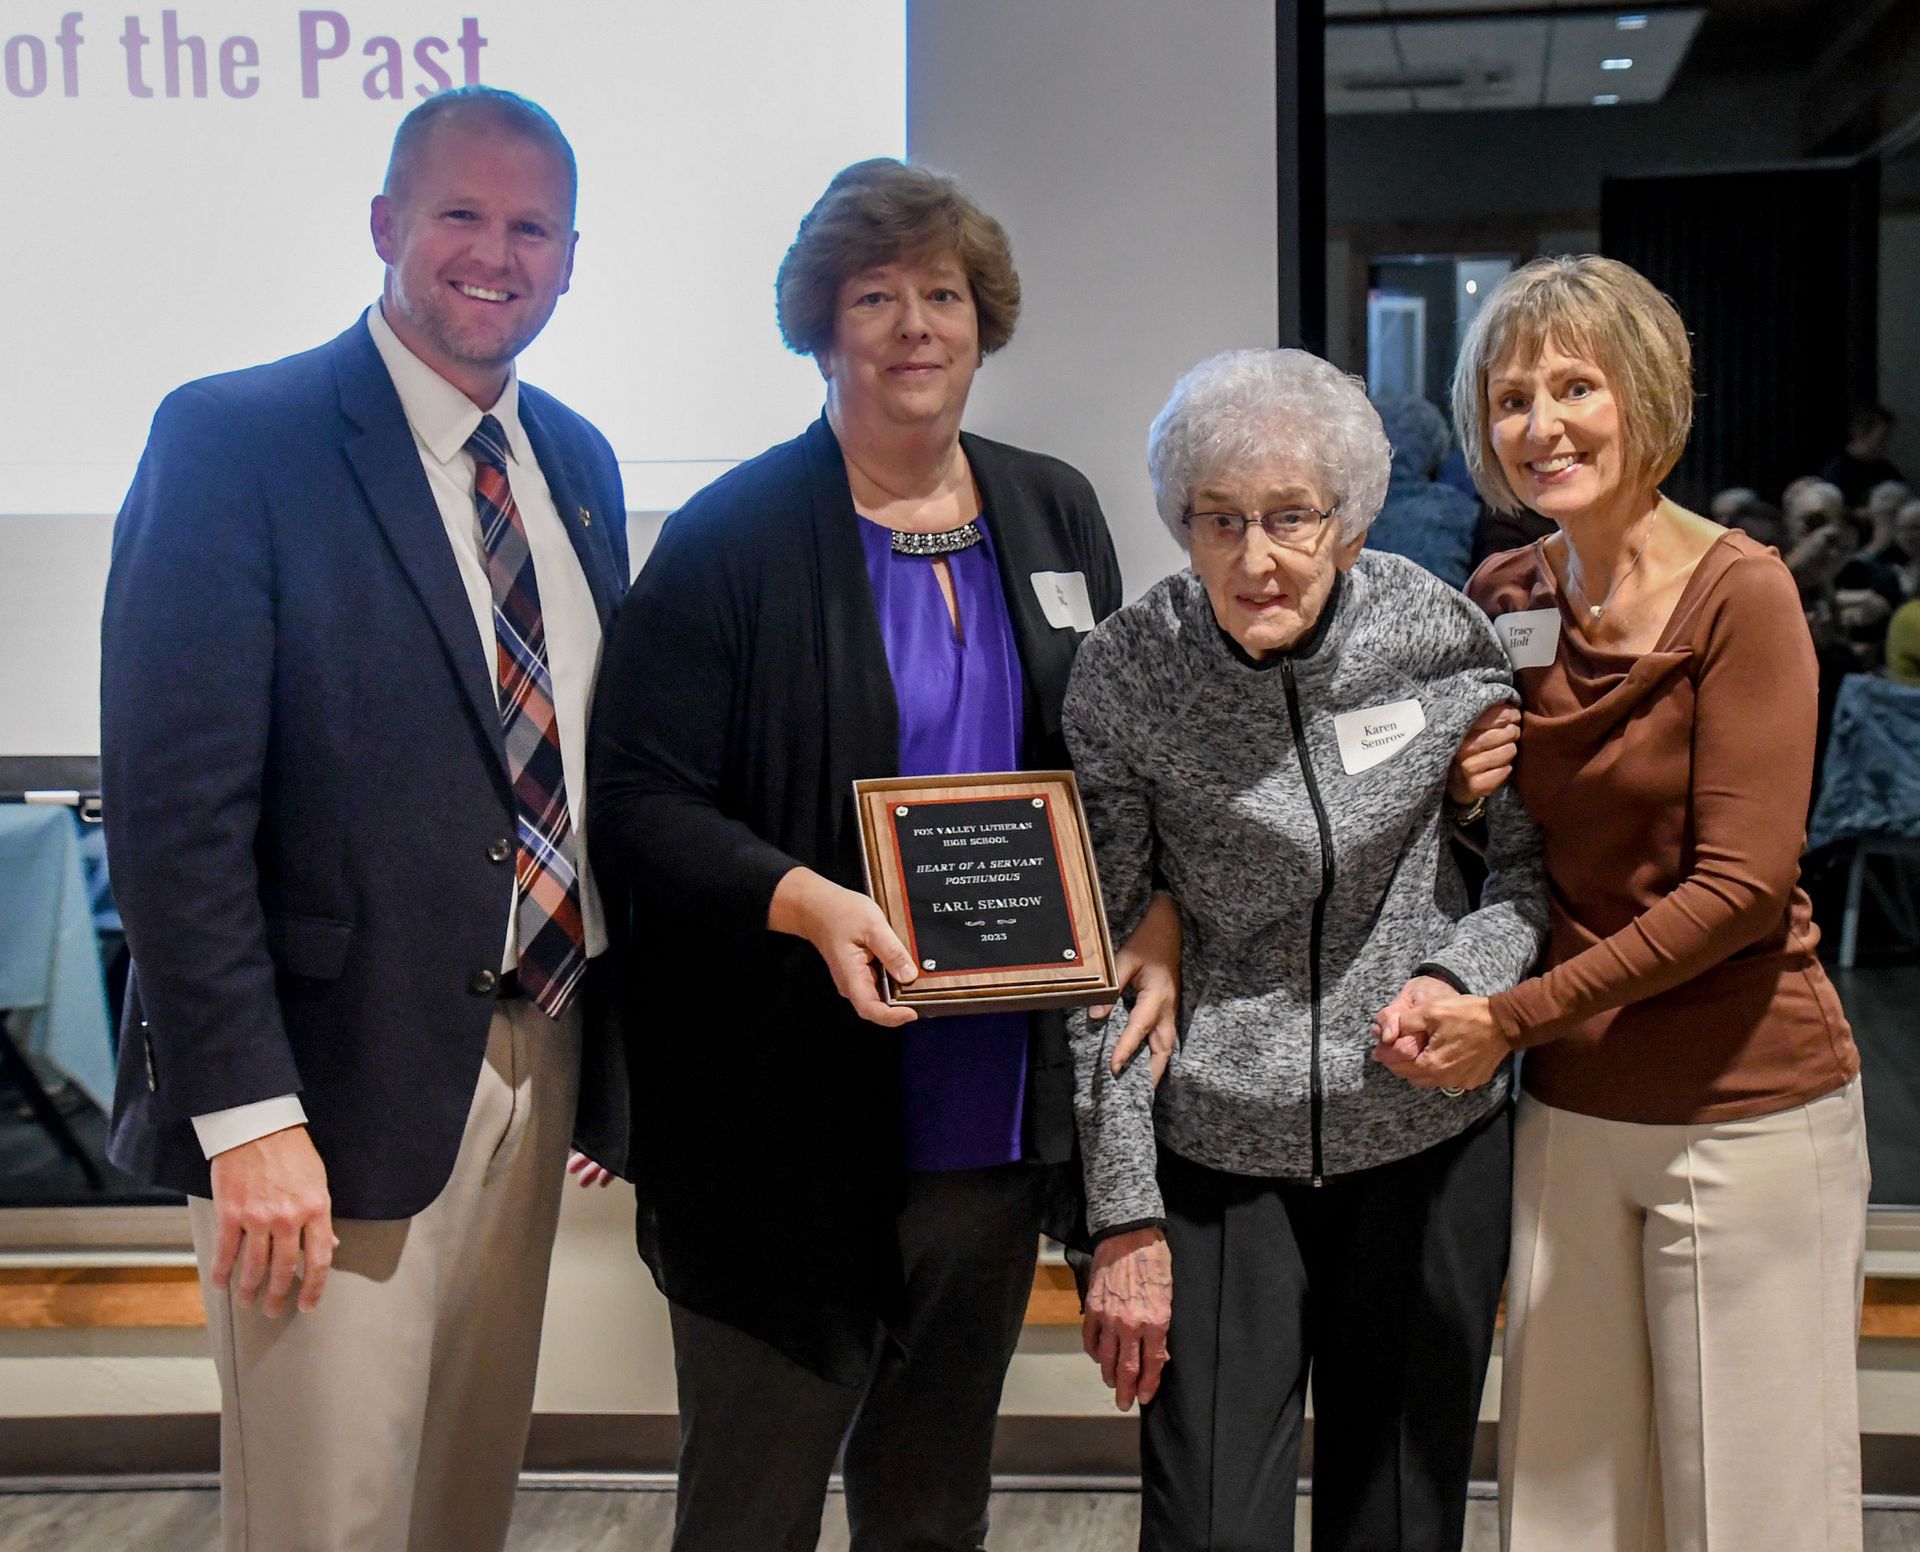 President Loberger with the family of Earl Semrow, holding up his plaque